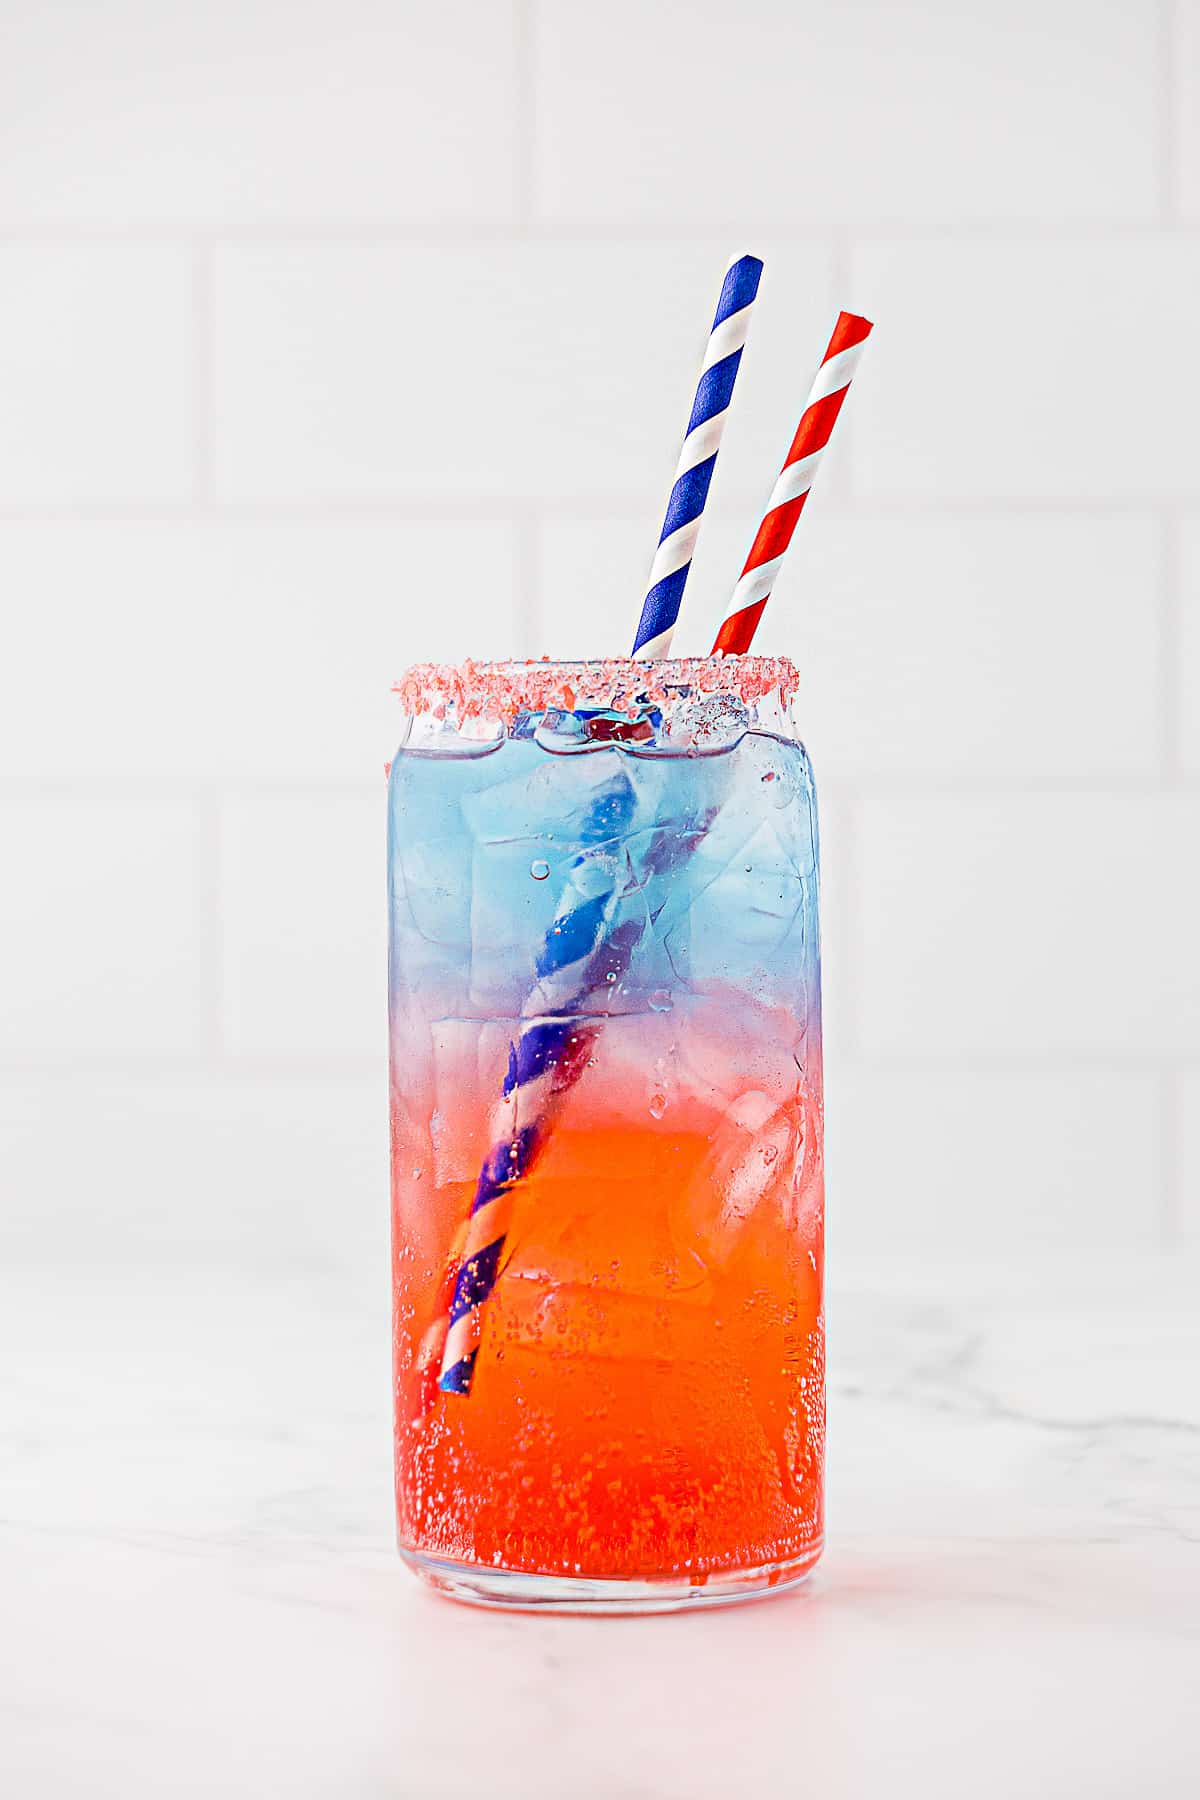 Layered red white and blue drink in tall thin glass with two straws and pop rock candy on rim of glass